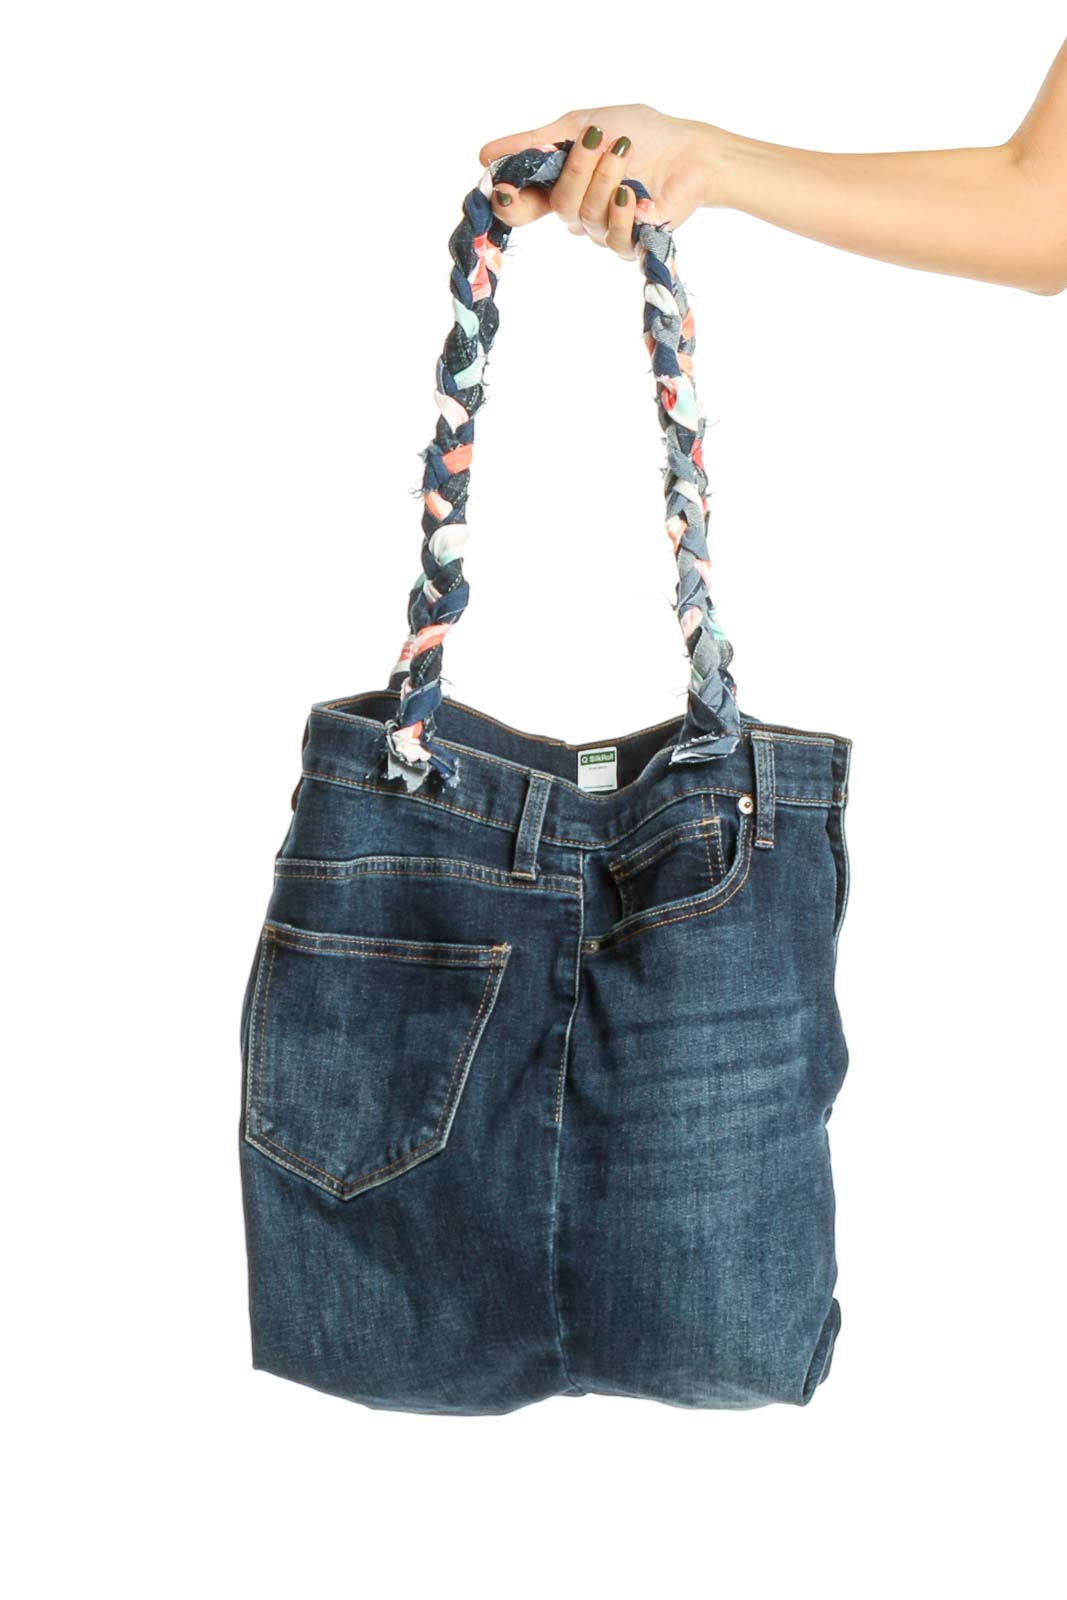 Reworked: Blue Denim Tote Bag  from Donated Denim Front